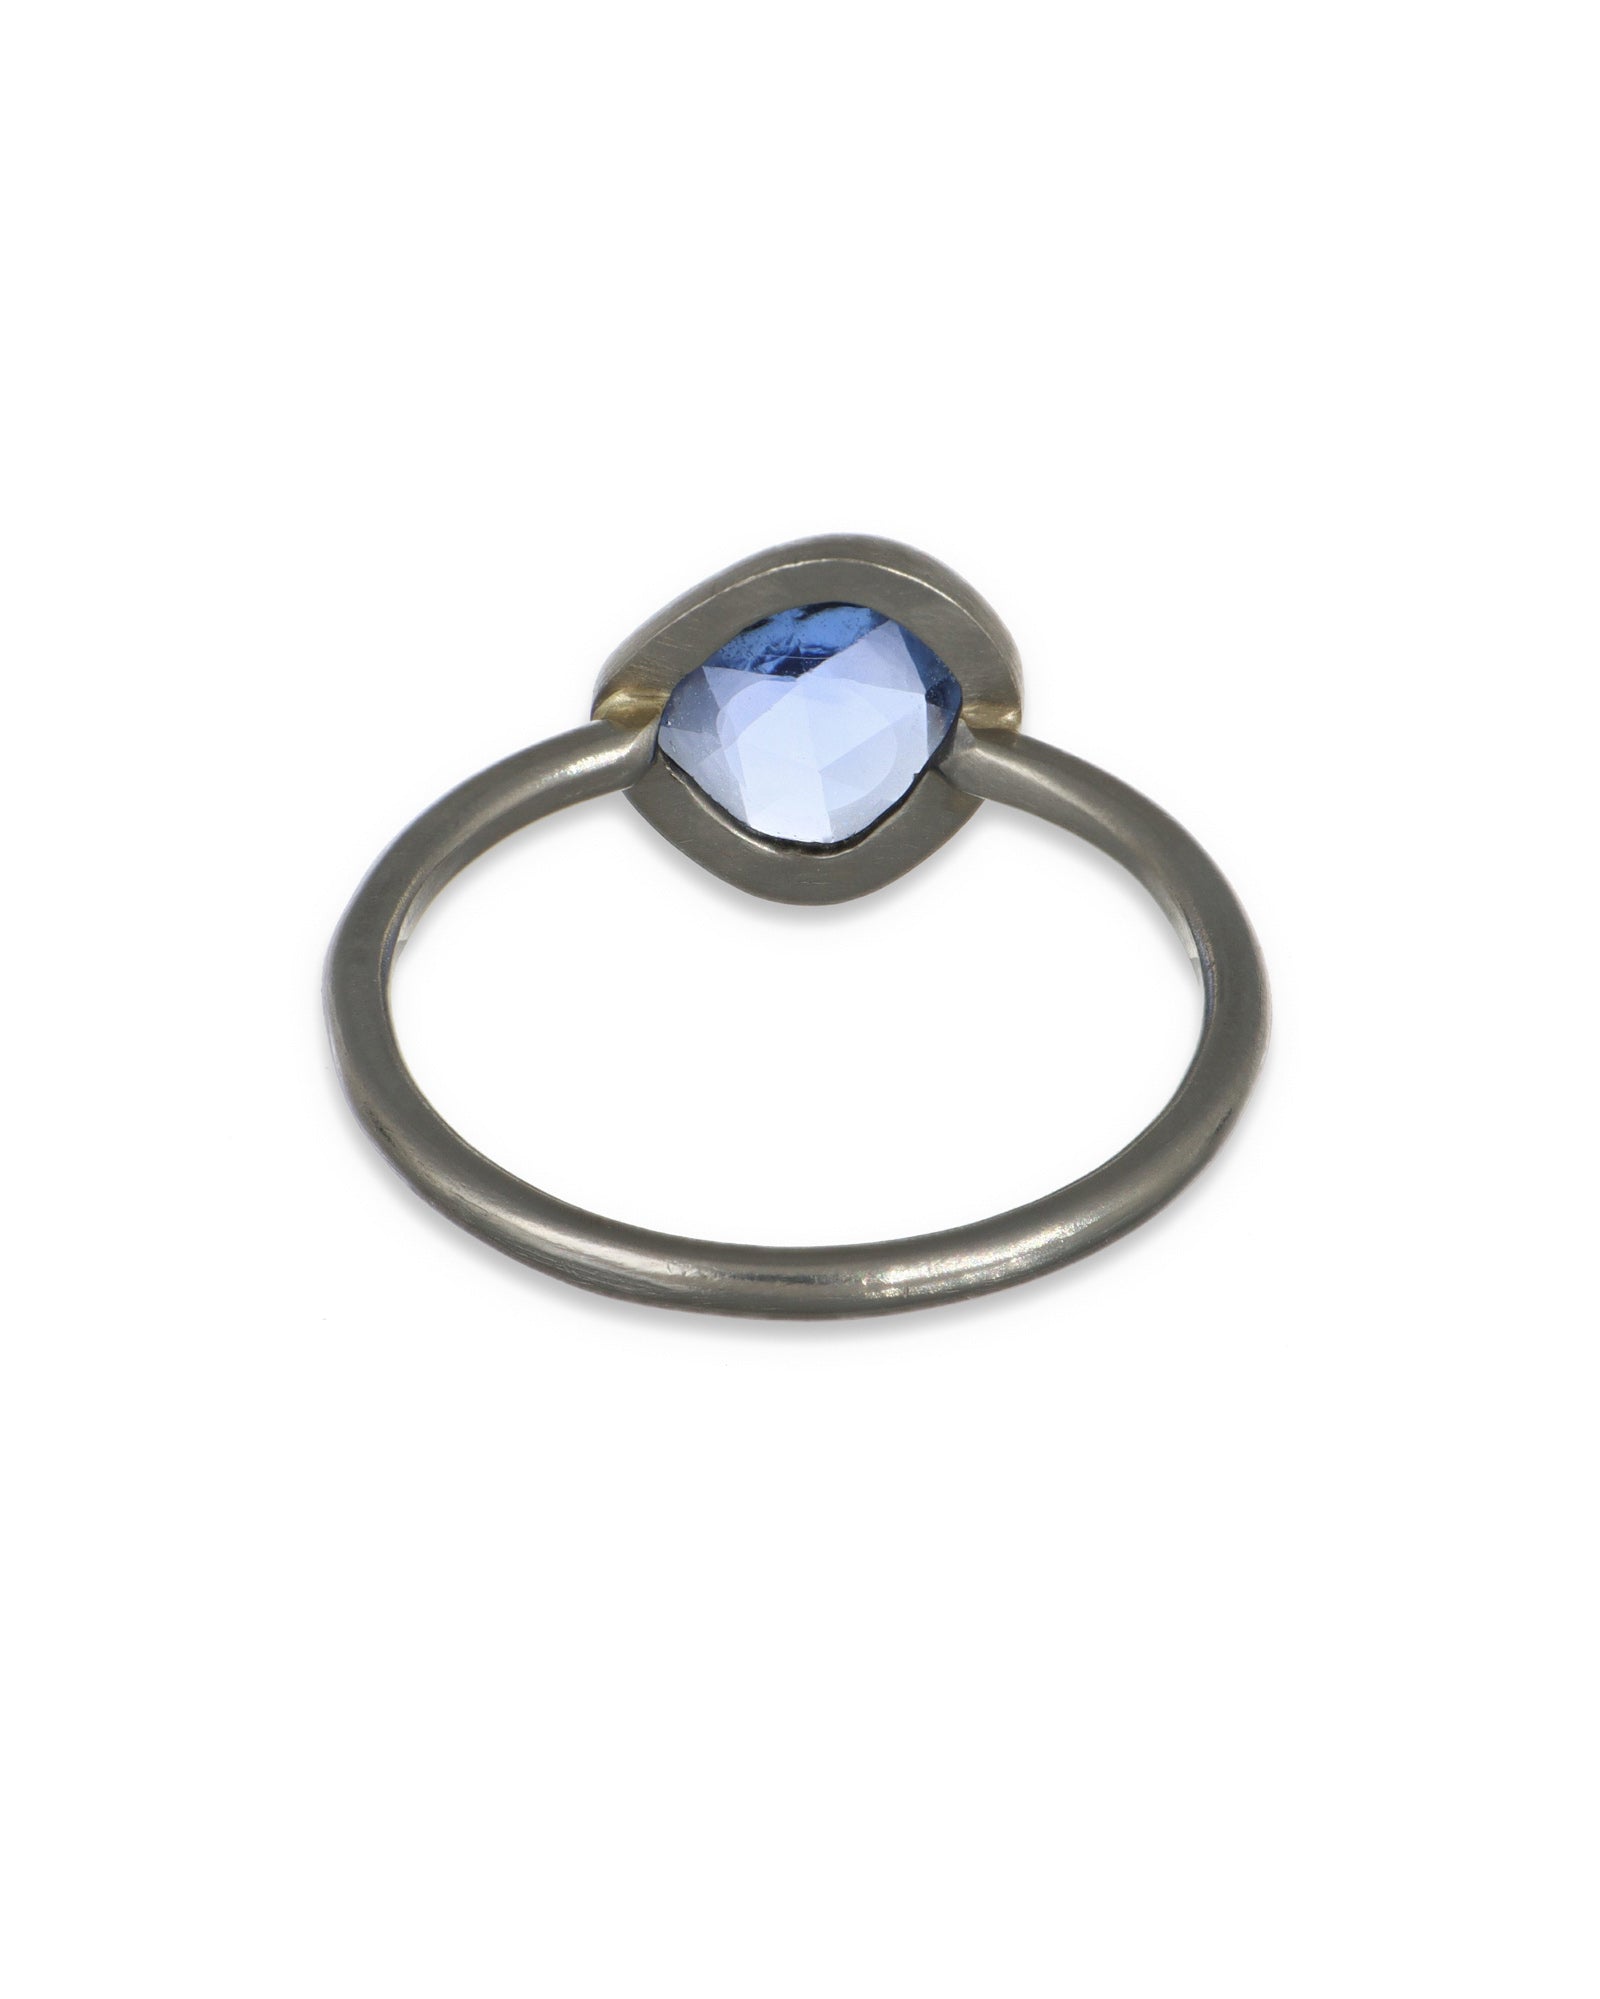 Faceted blue sapphire Ring